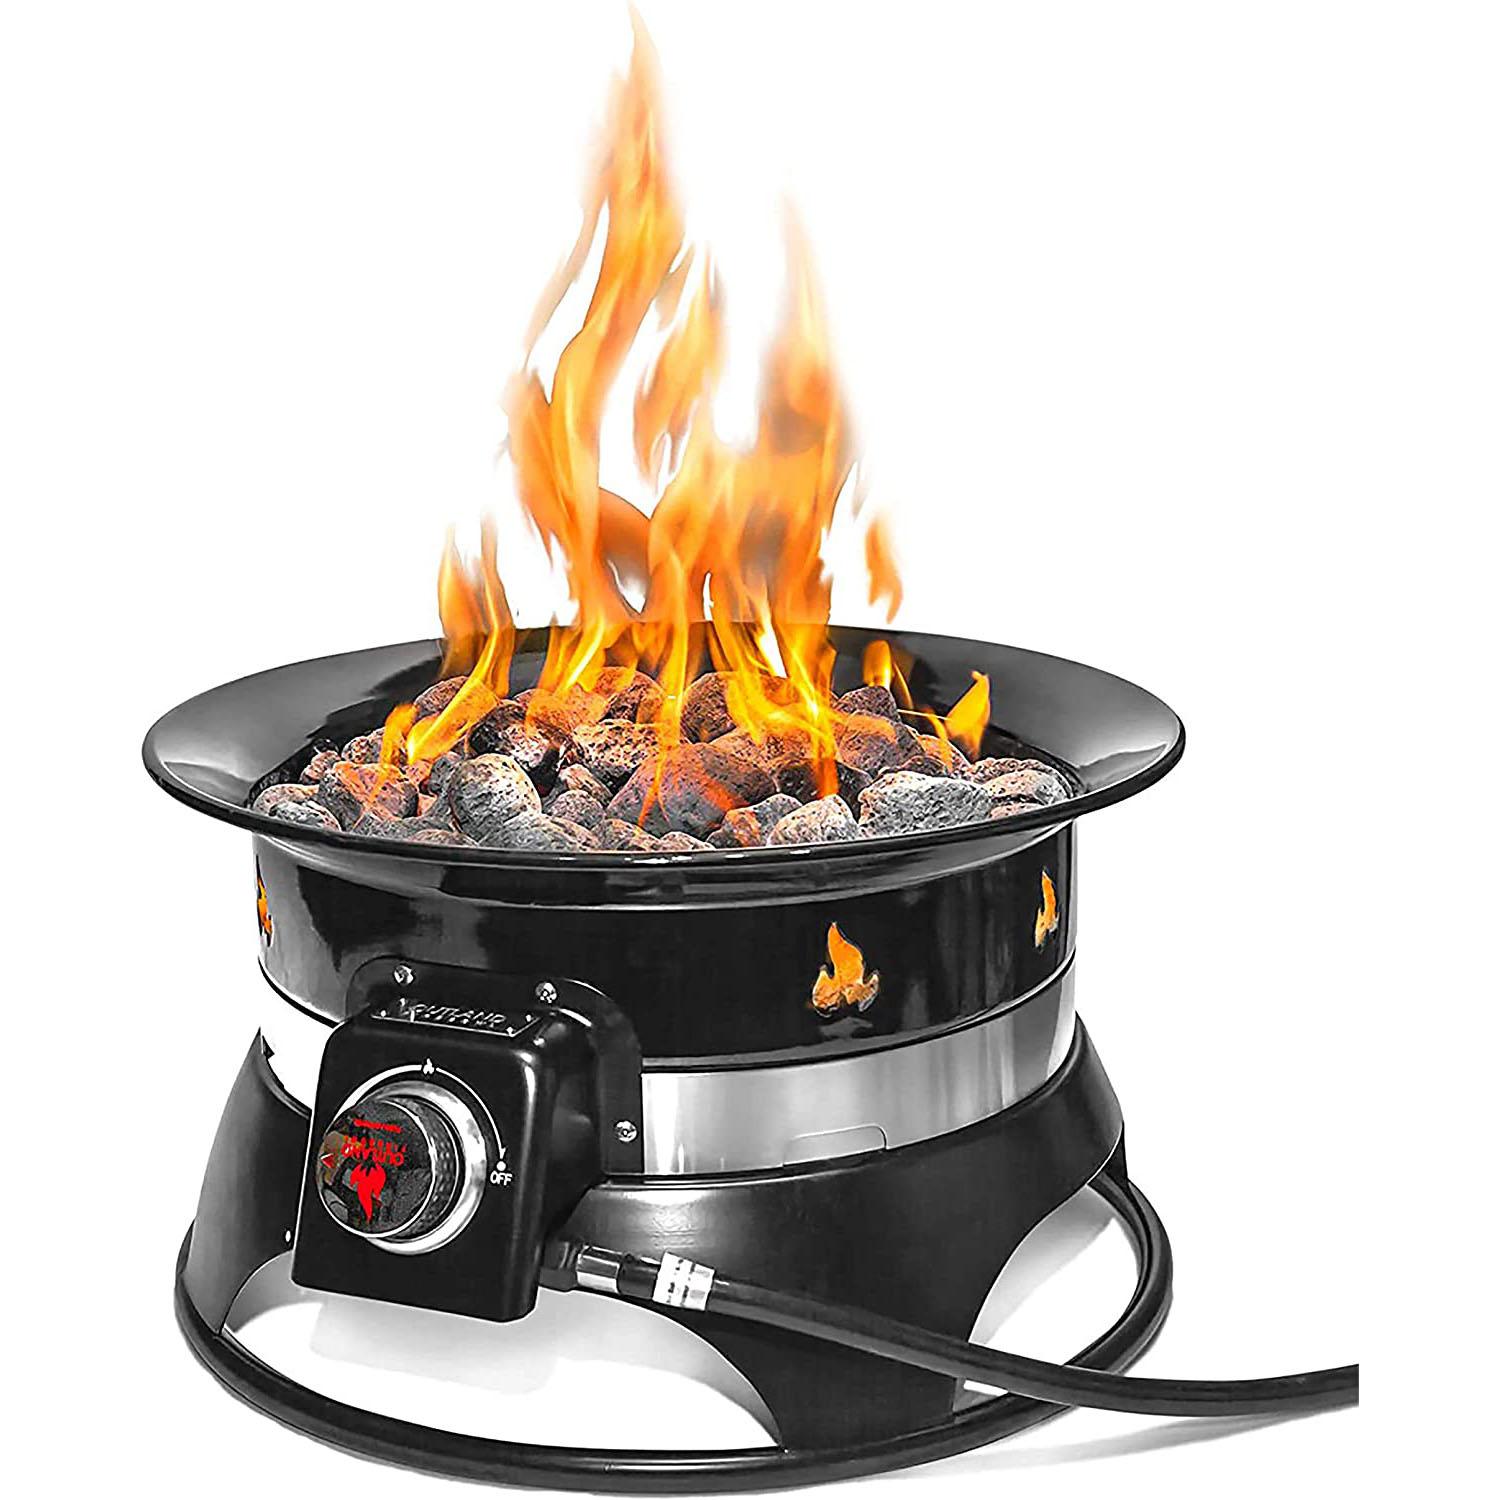 Outland Living Model 870 Portable Propane Fire Pit for $69.35 Shipped